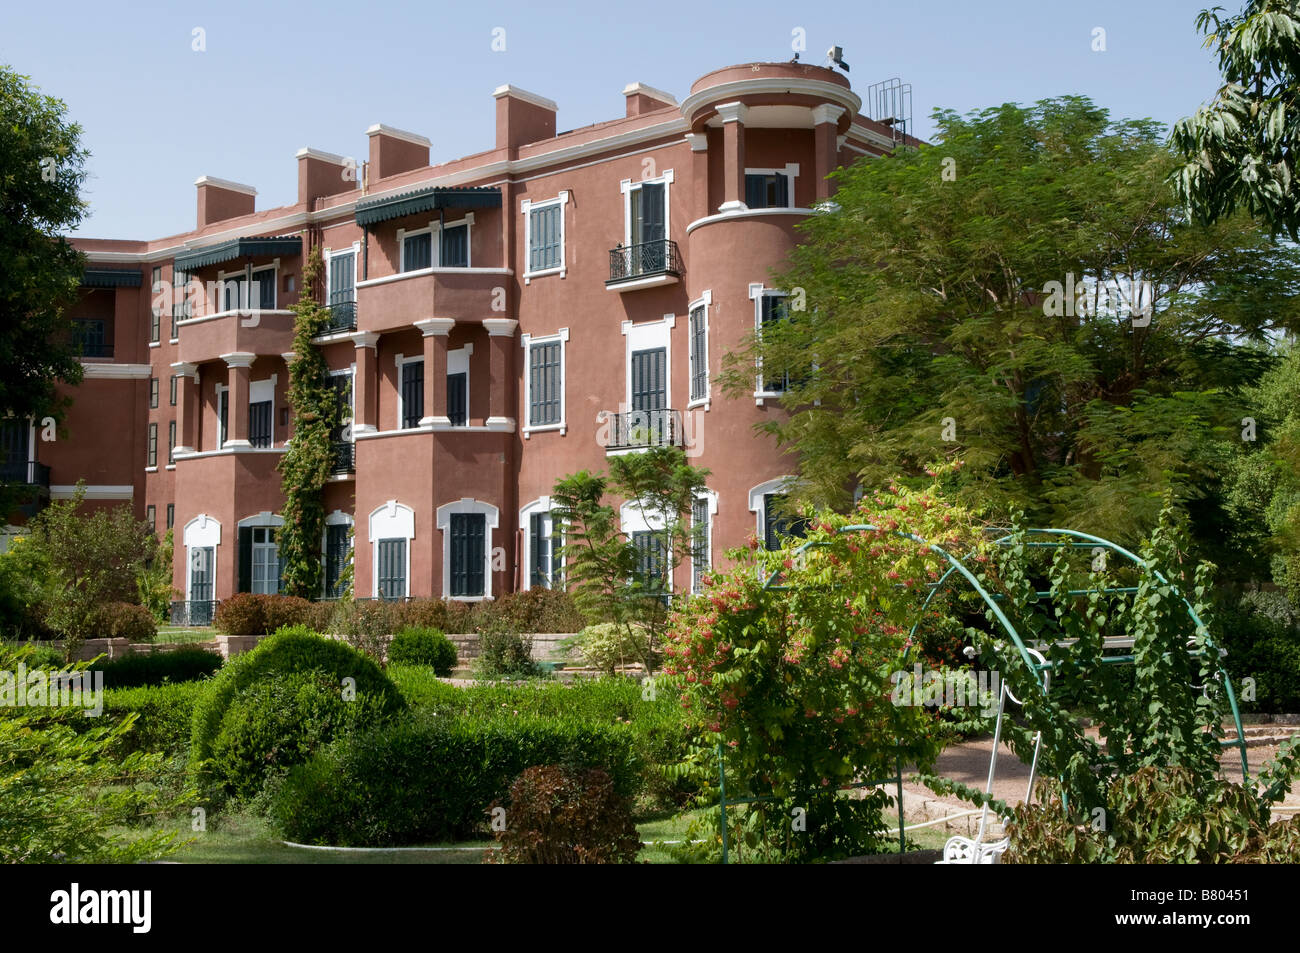 The Sofitel Legend Old Cataract Hotel a historic British colonial-era 5-star luxury resort hotel located on the banks of the River Nile in Aswan Egypt Stock Photo